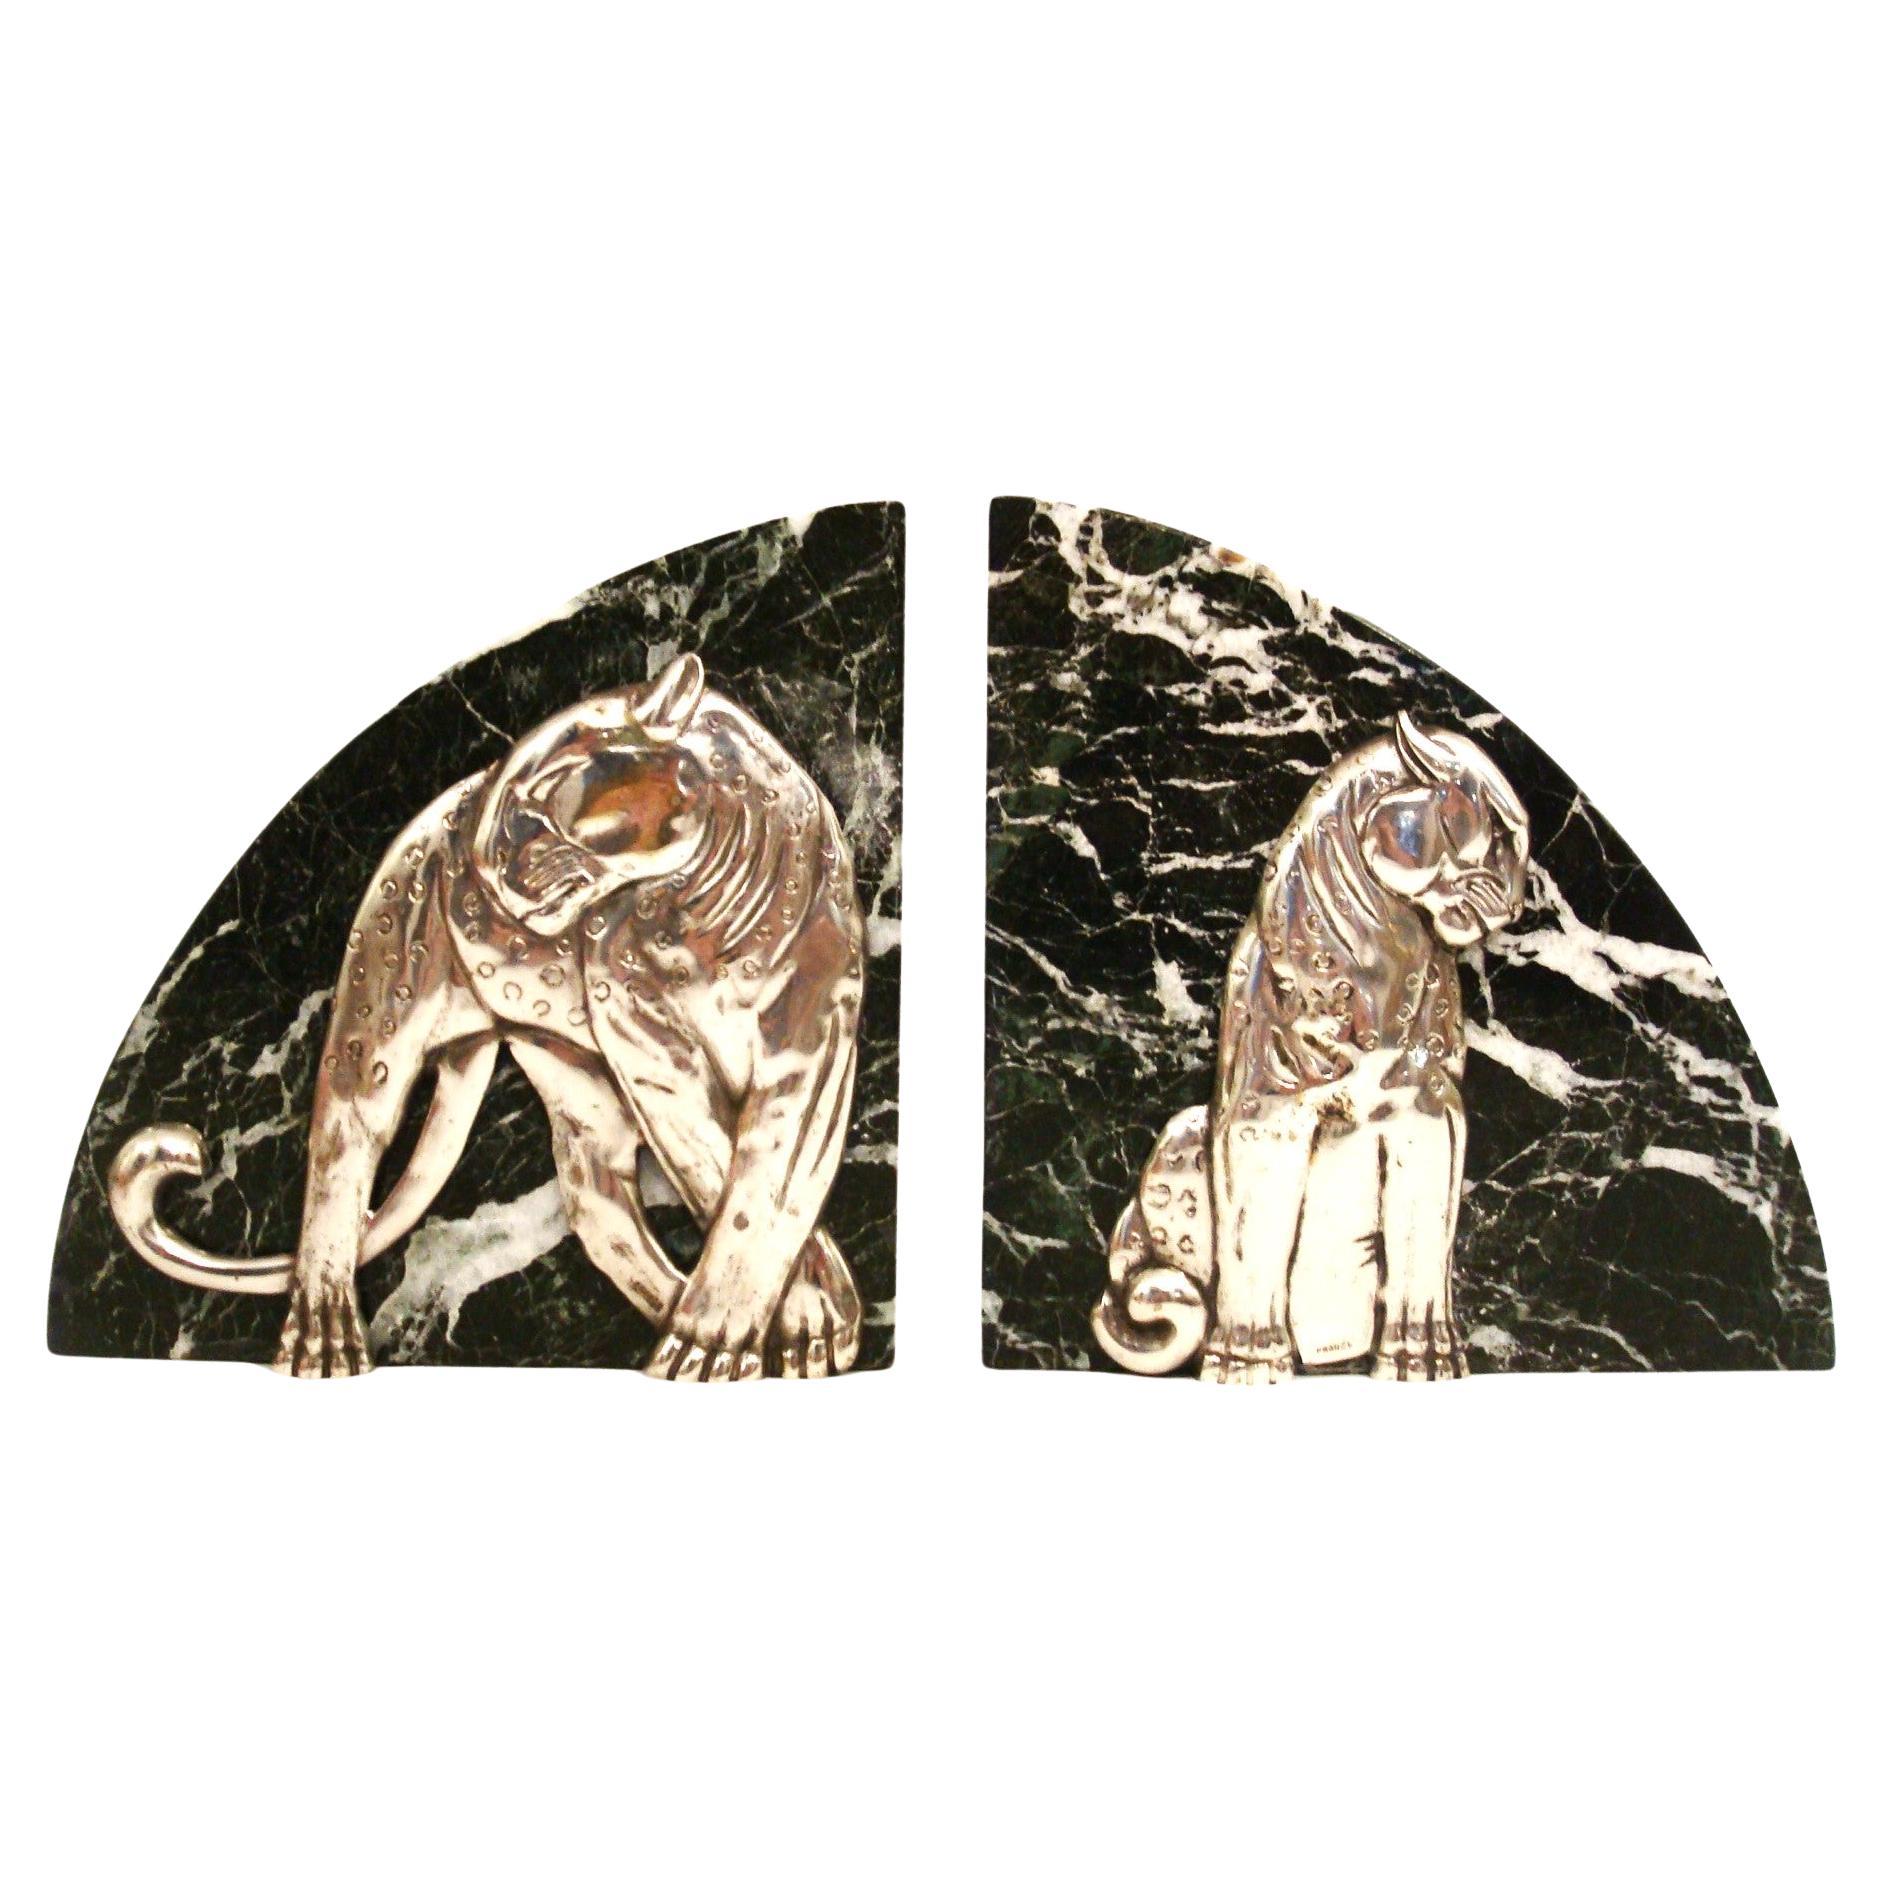 Art Deco Pair of Panther Bookends, Silvered Bronze and Marble - France, 1920s